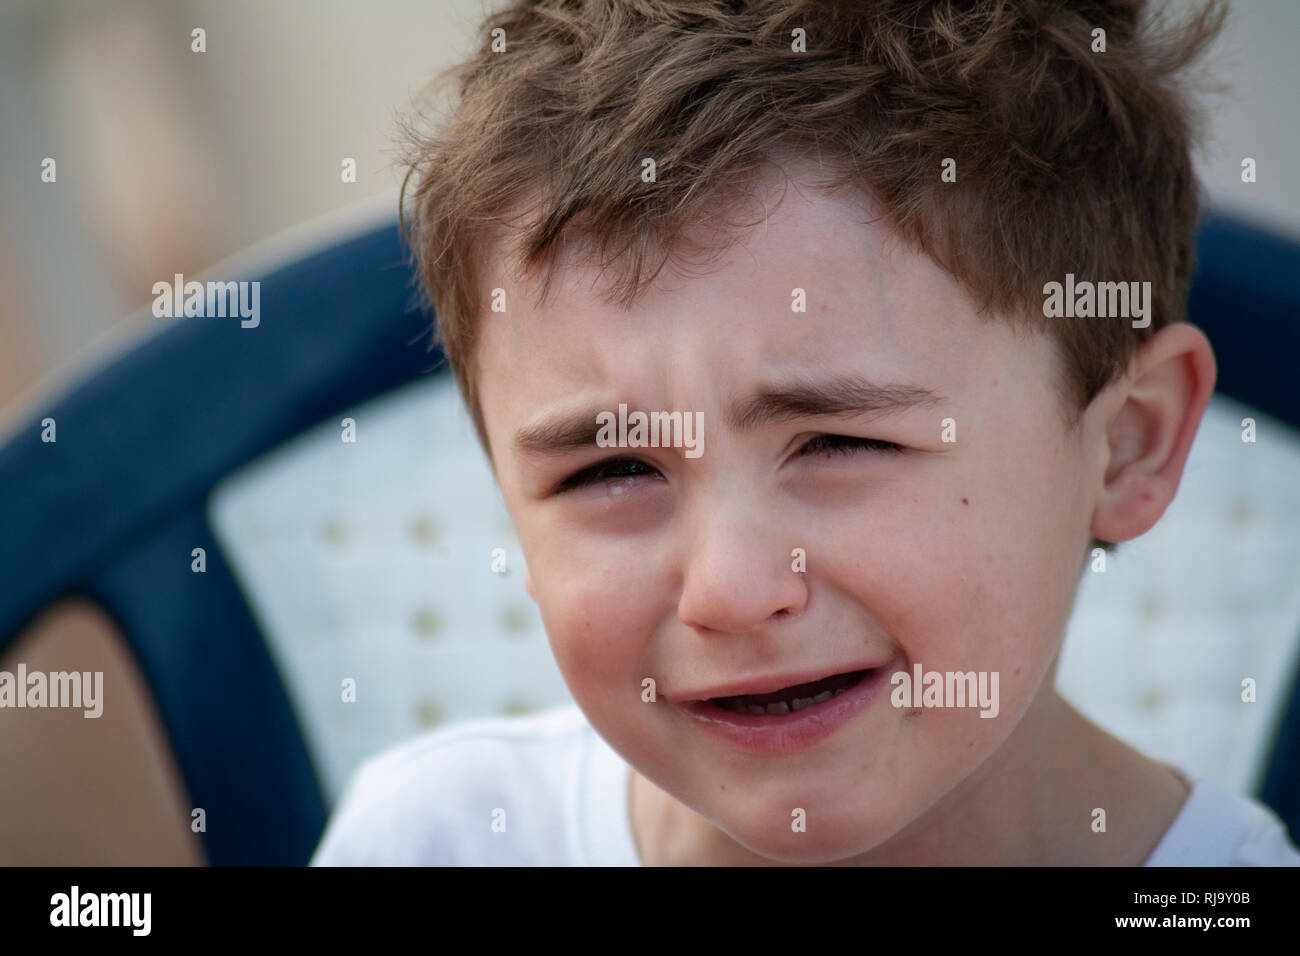 Small Child Crying Stock Photo